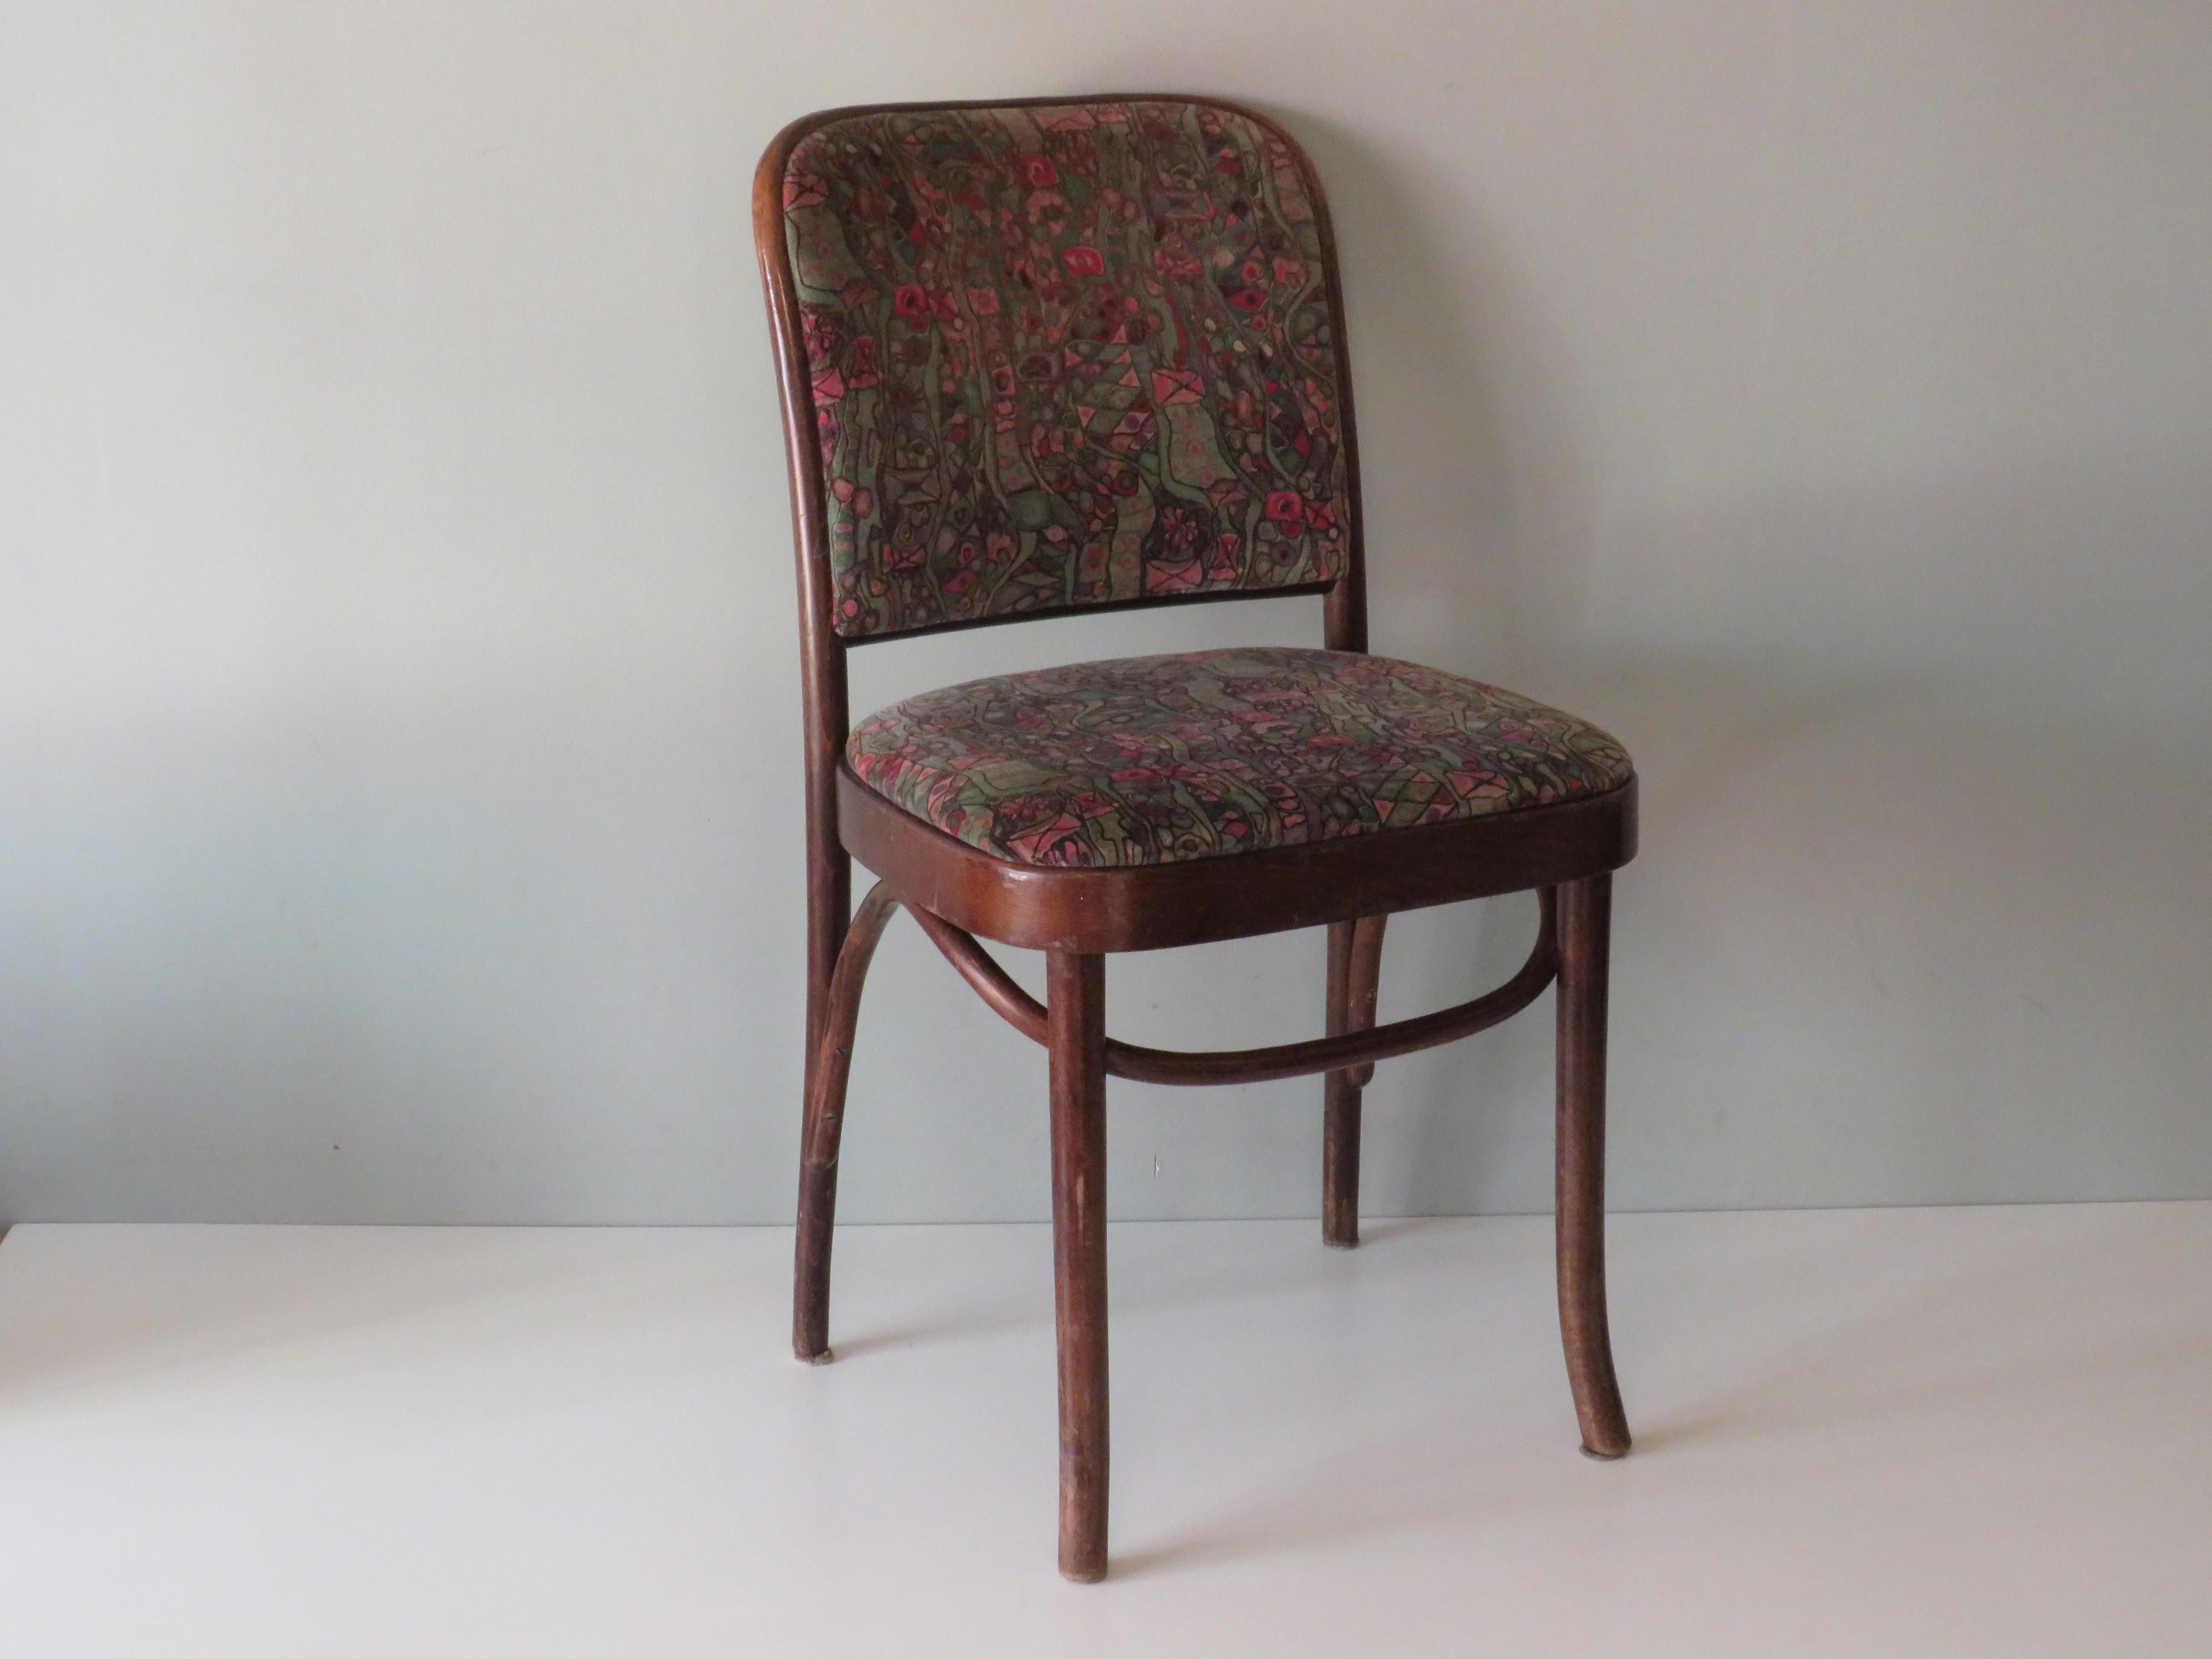 4 Thonet Chairs, Model Prague No. 811, First Half of the 20th Century For Sale 4